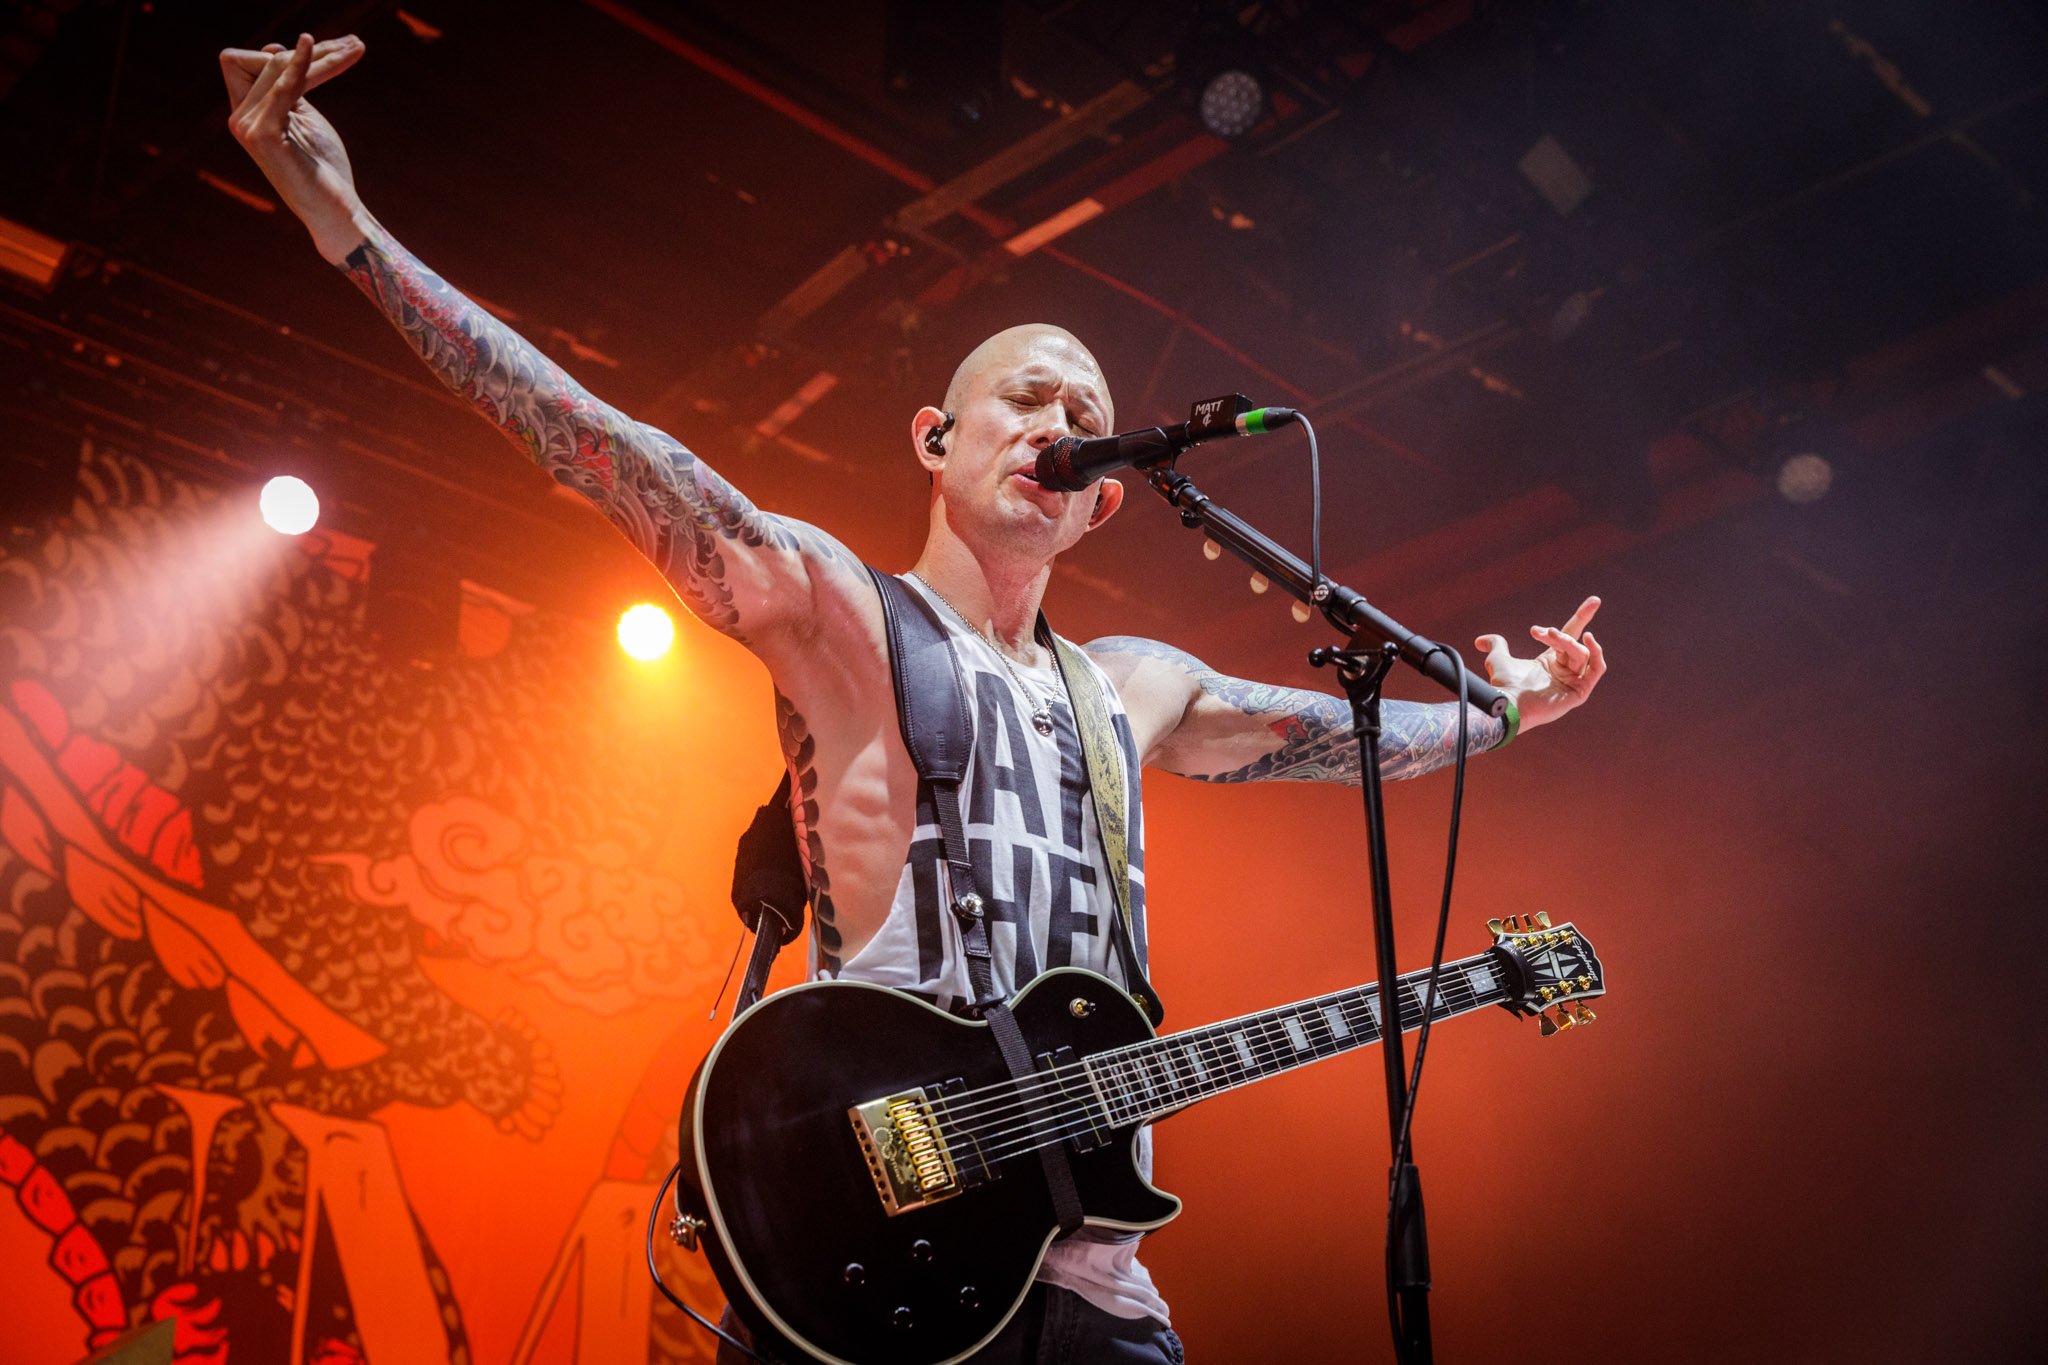 Trivium at the O2 Victoria Warehouse in Manchester on January 14